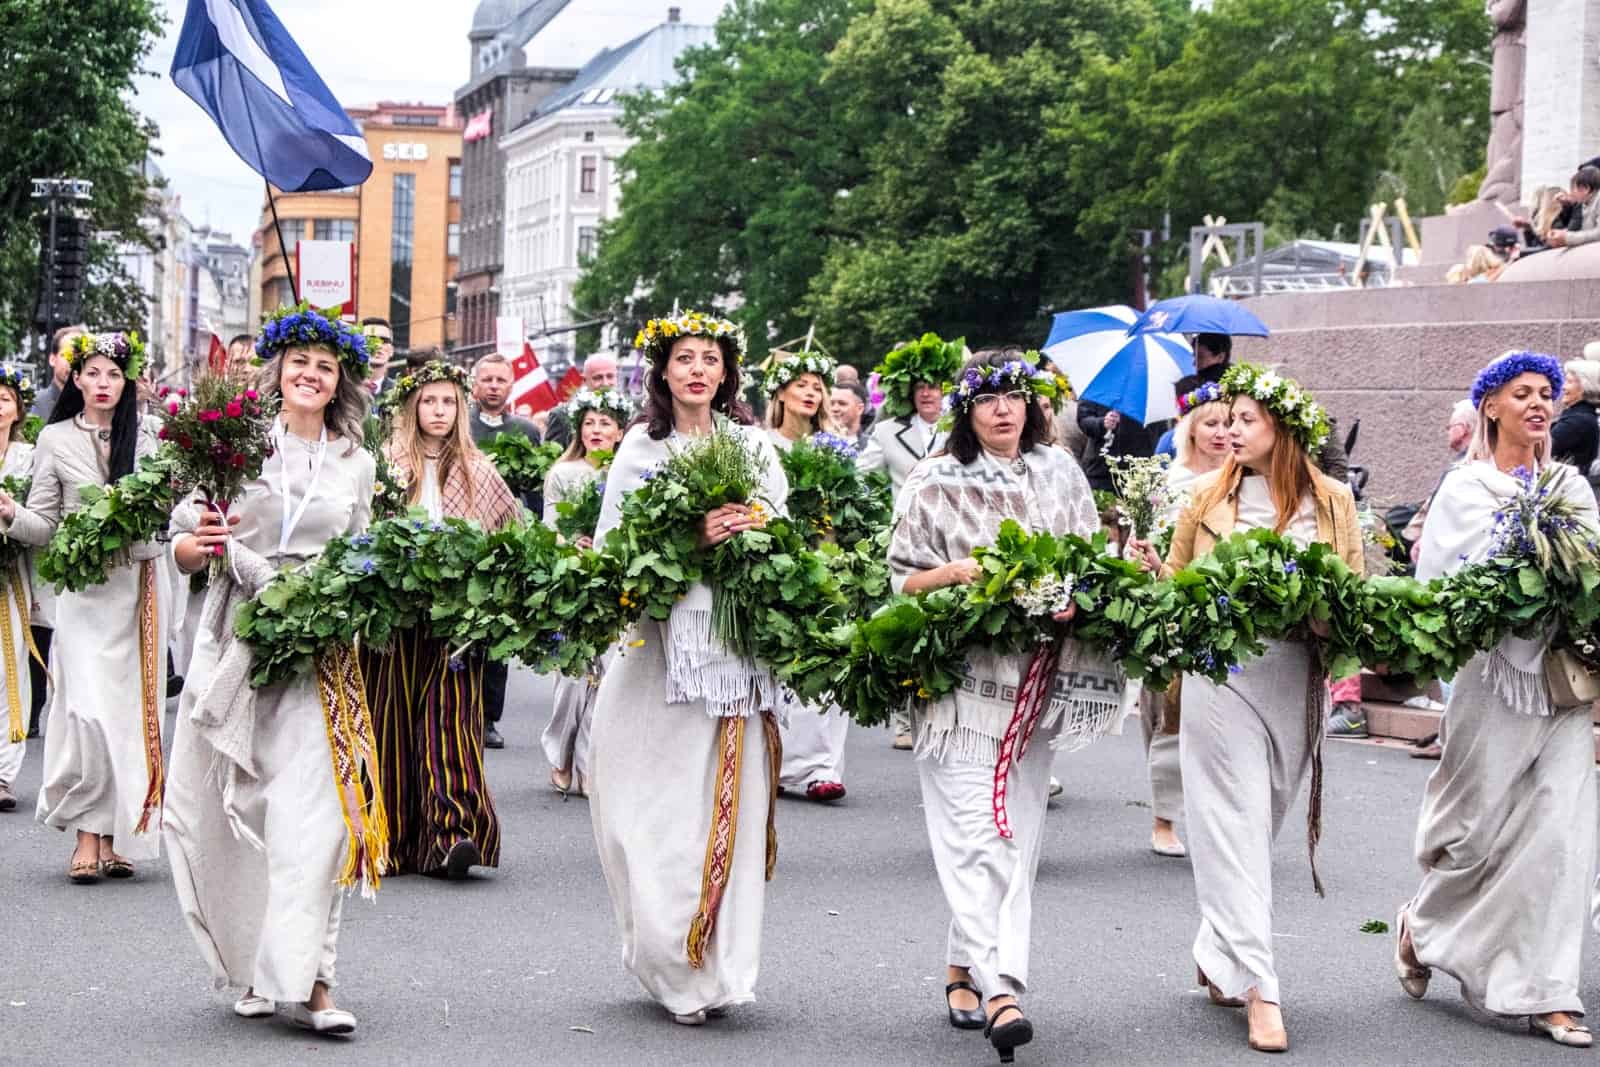 Women with flowers at the Song and Dance Celebration in Riga, Latvia